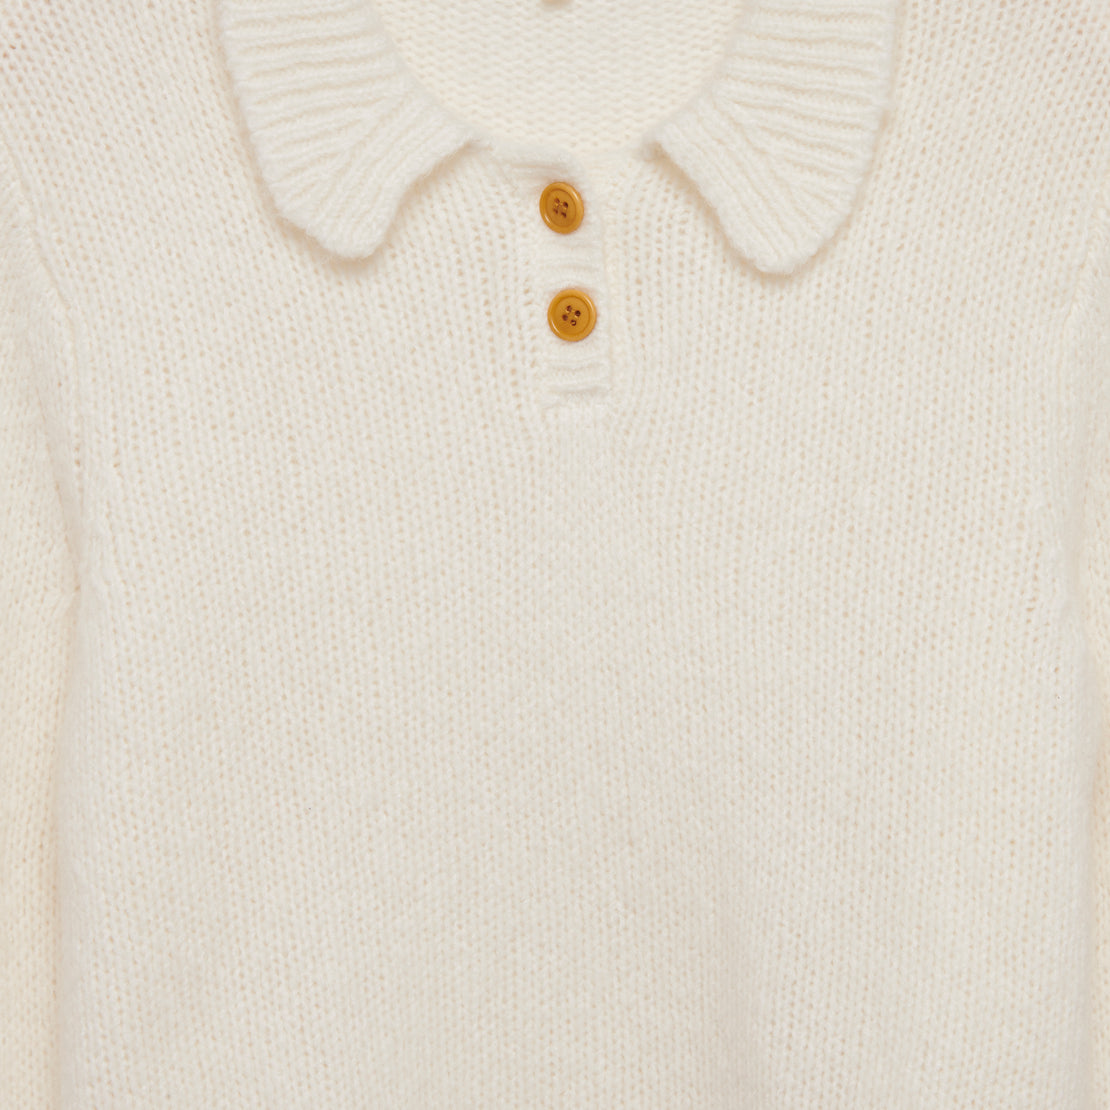 Frank Henley Sweater - Ivory - Alex Mill - STAG Provisions - W - Tops - Sweater